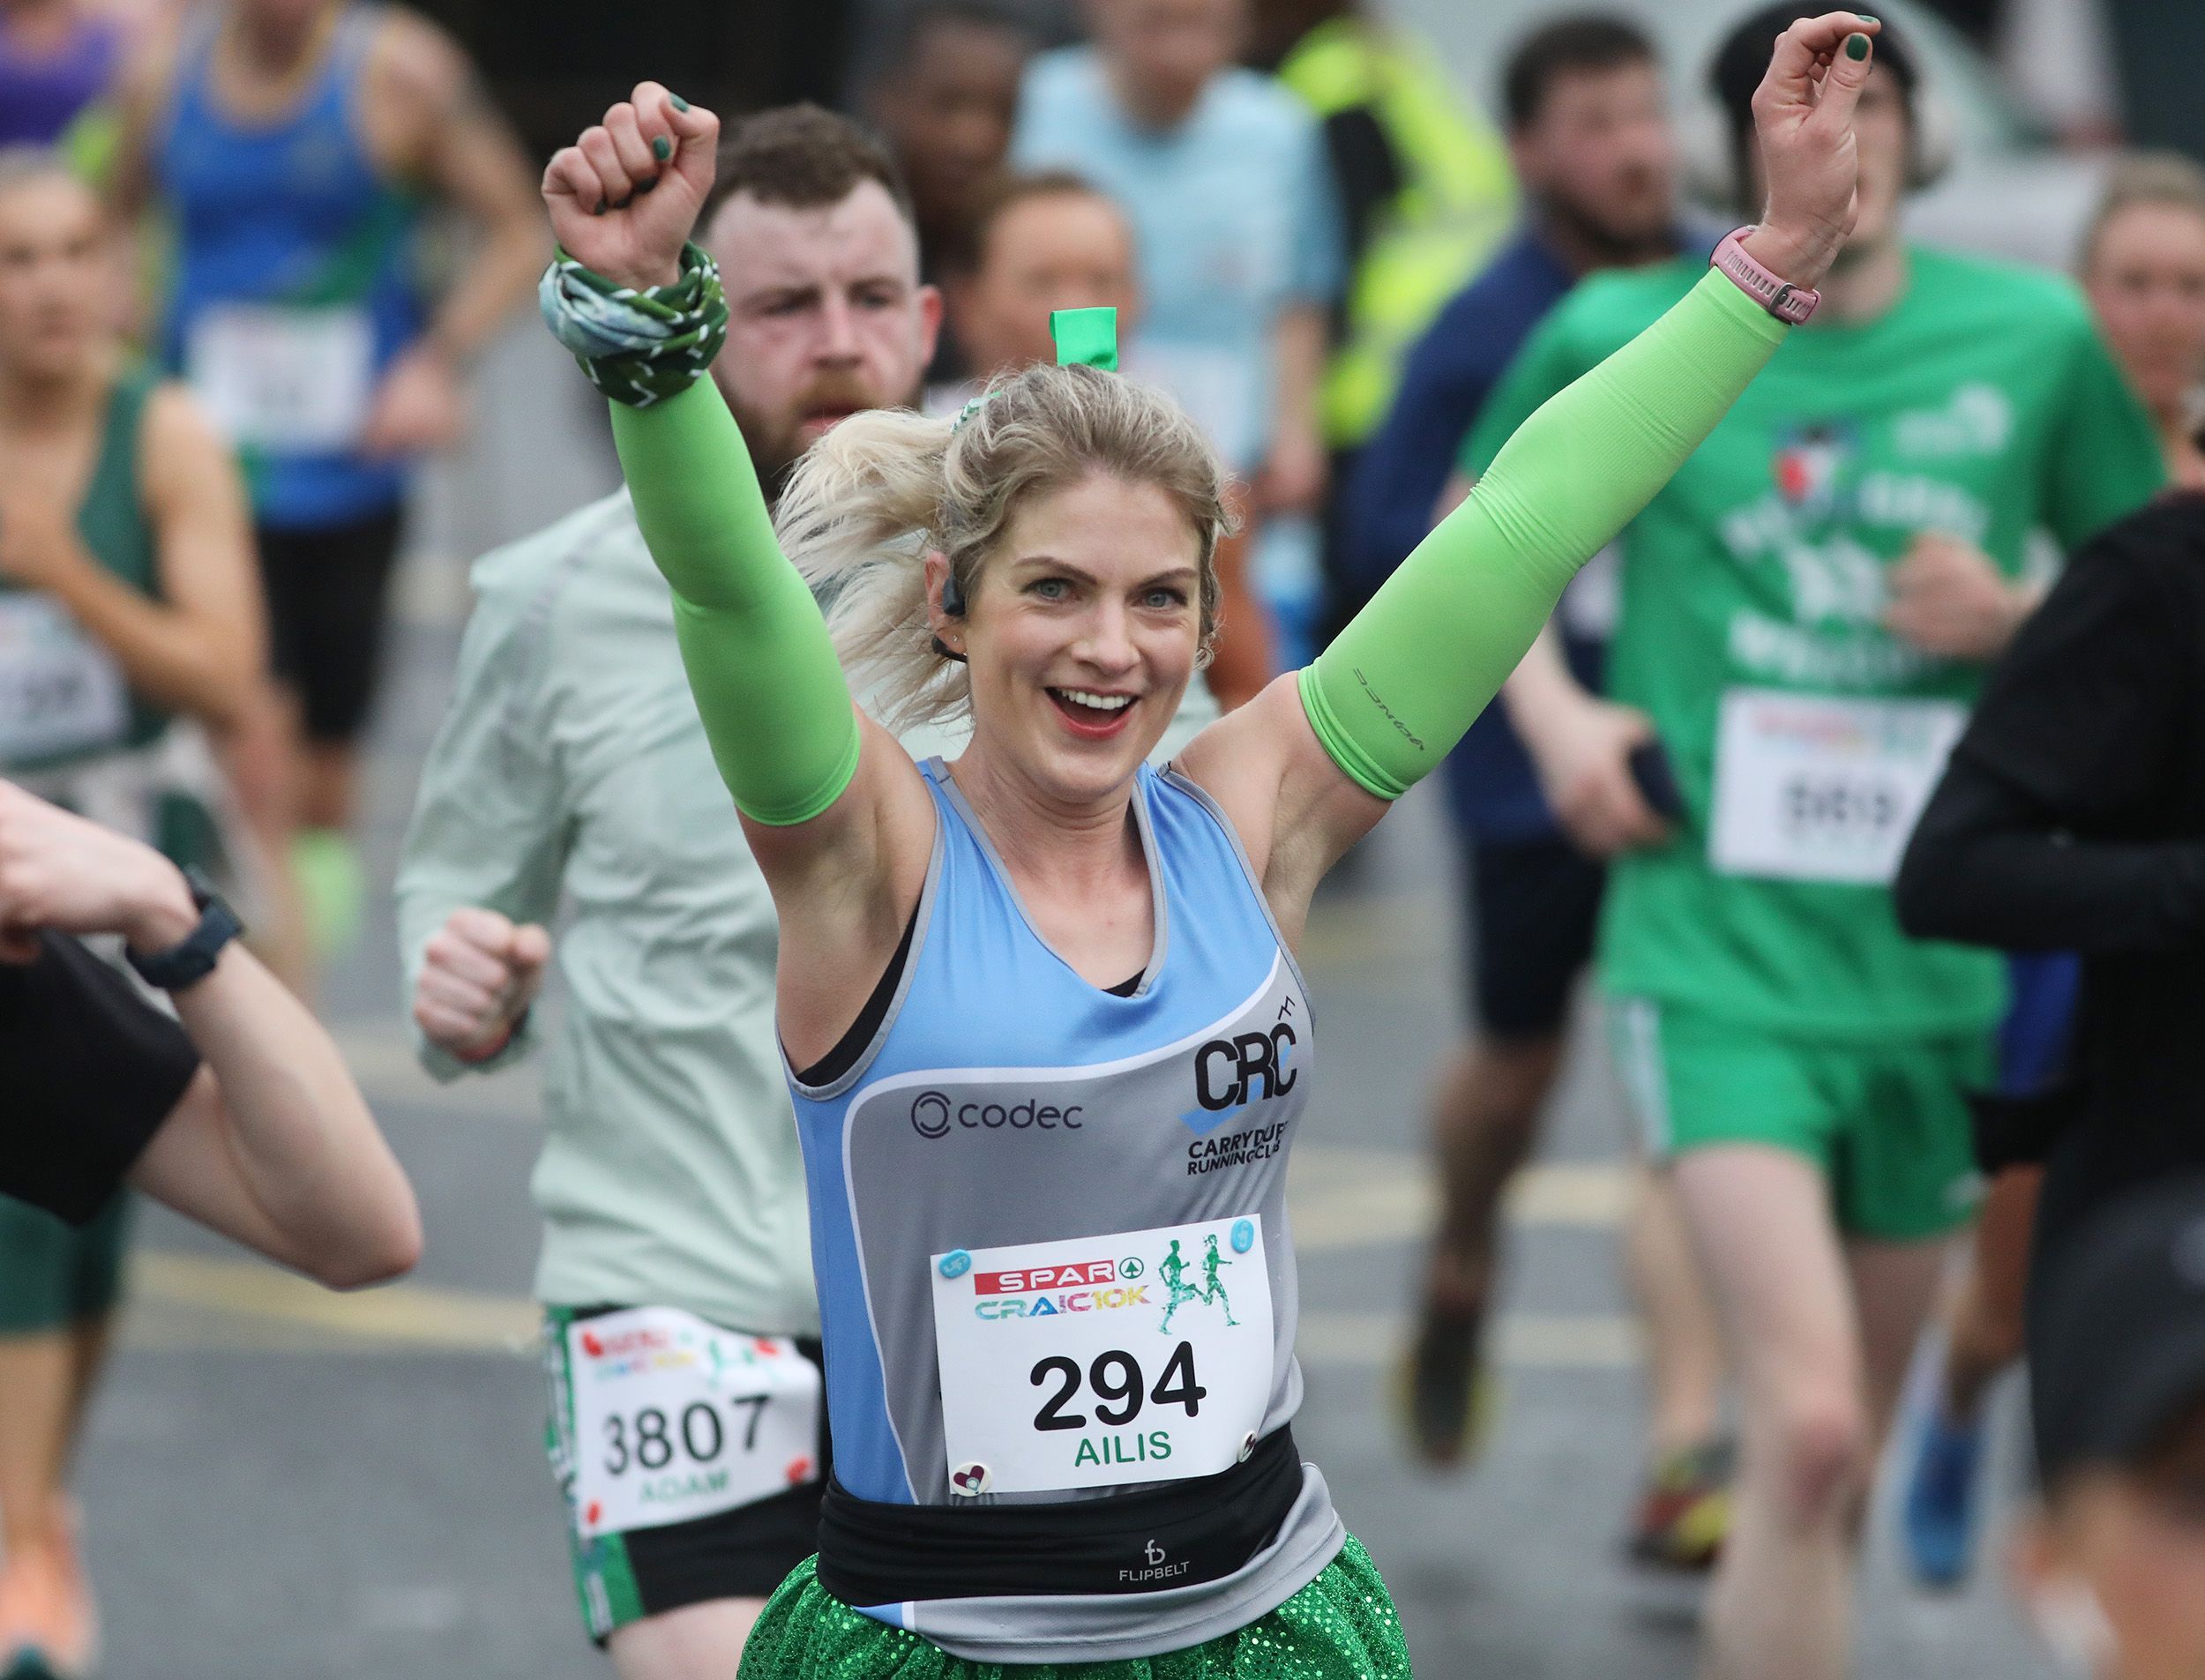 GO GREEN: in the fast lane at the annual SPAR Craic 10K